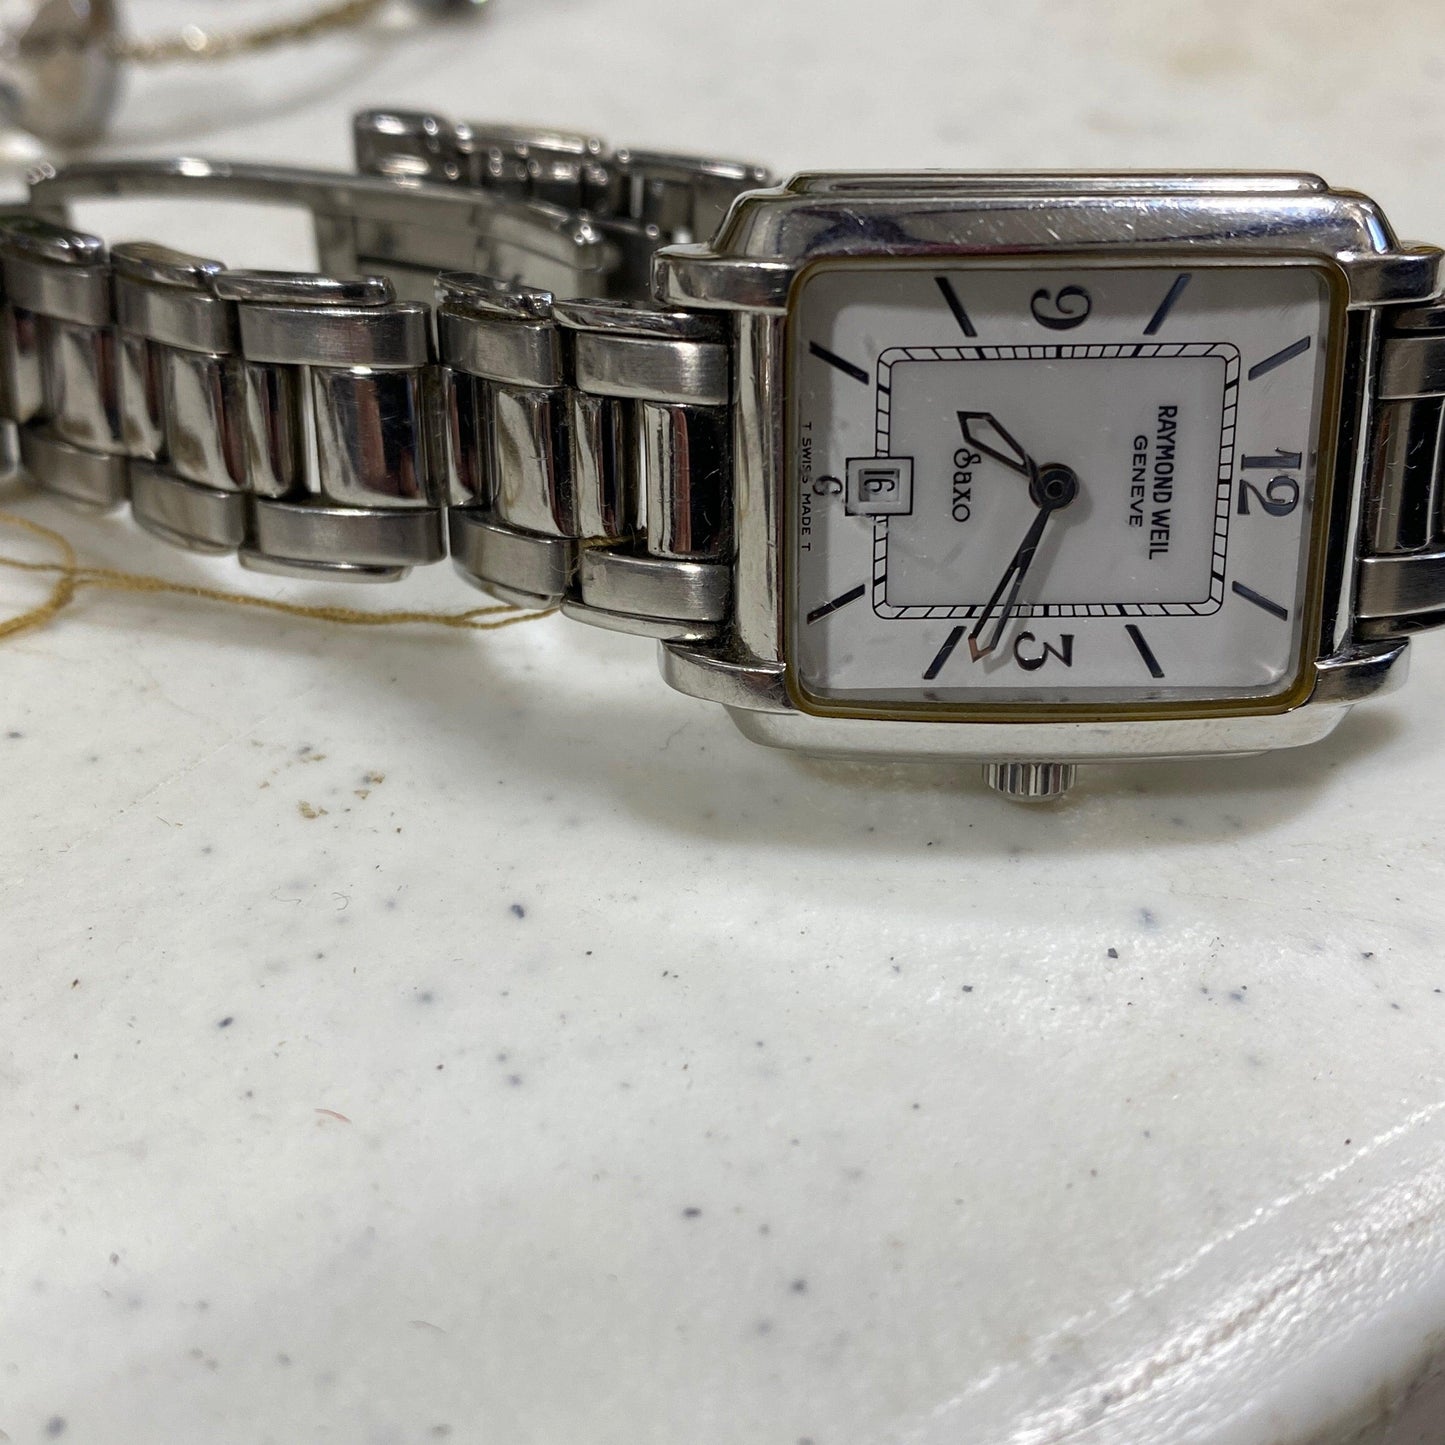 Raymond Weil Watch - The White Barn Antiques